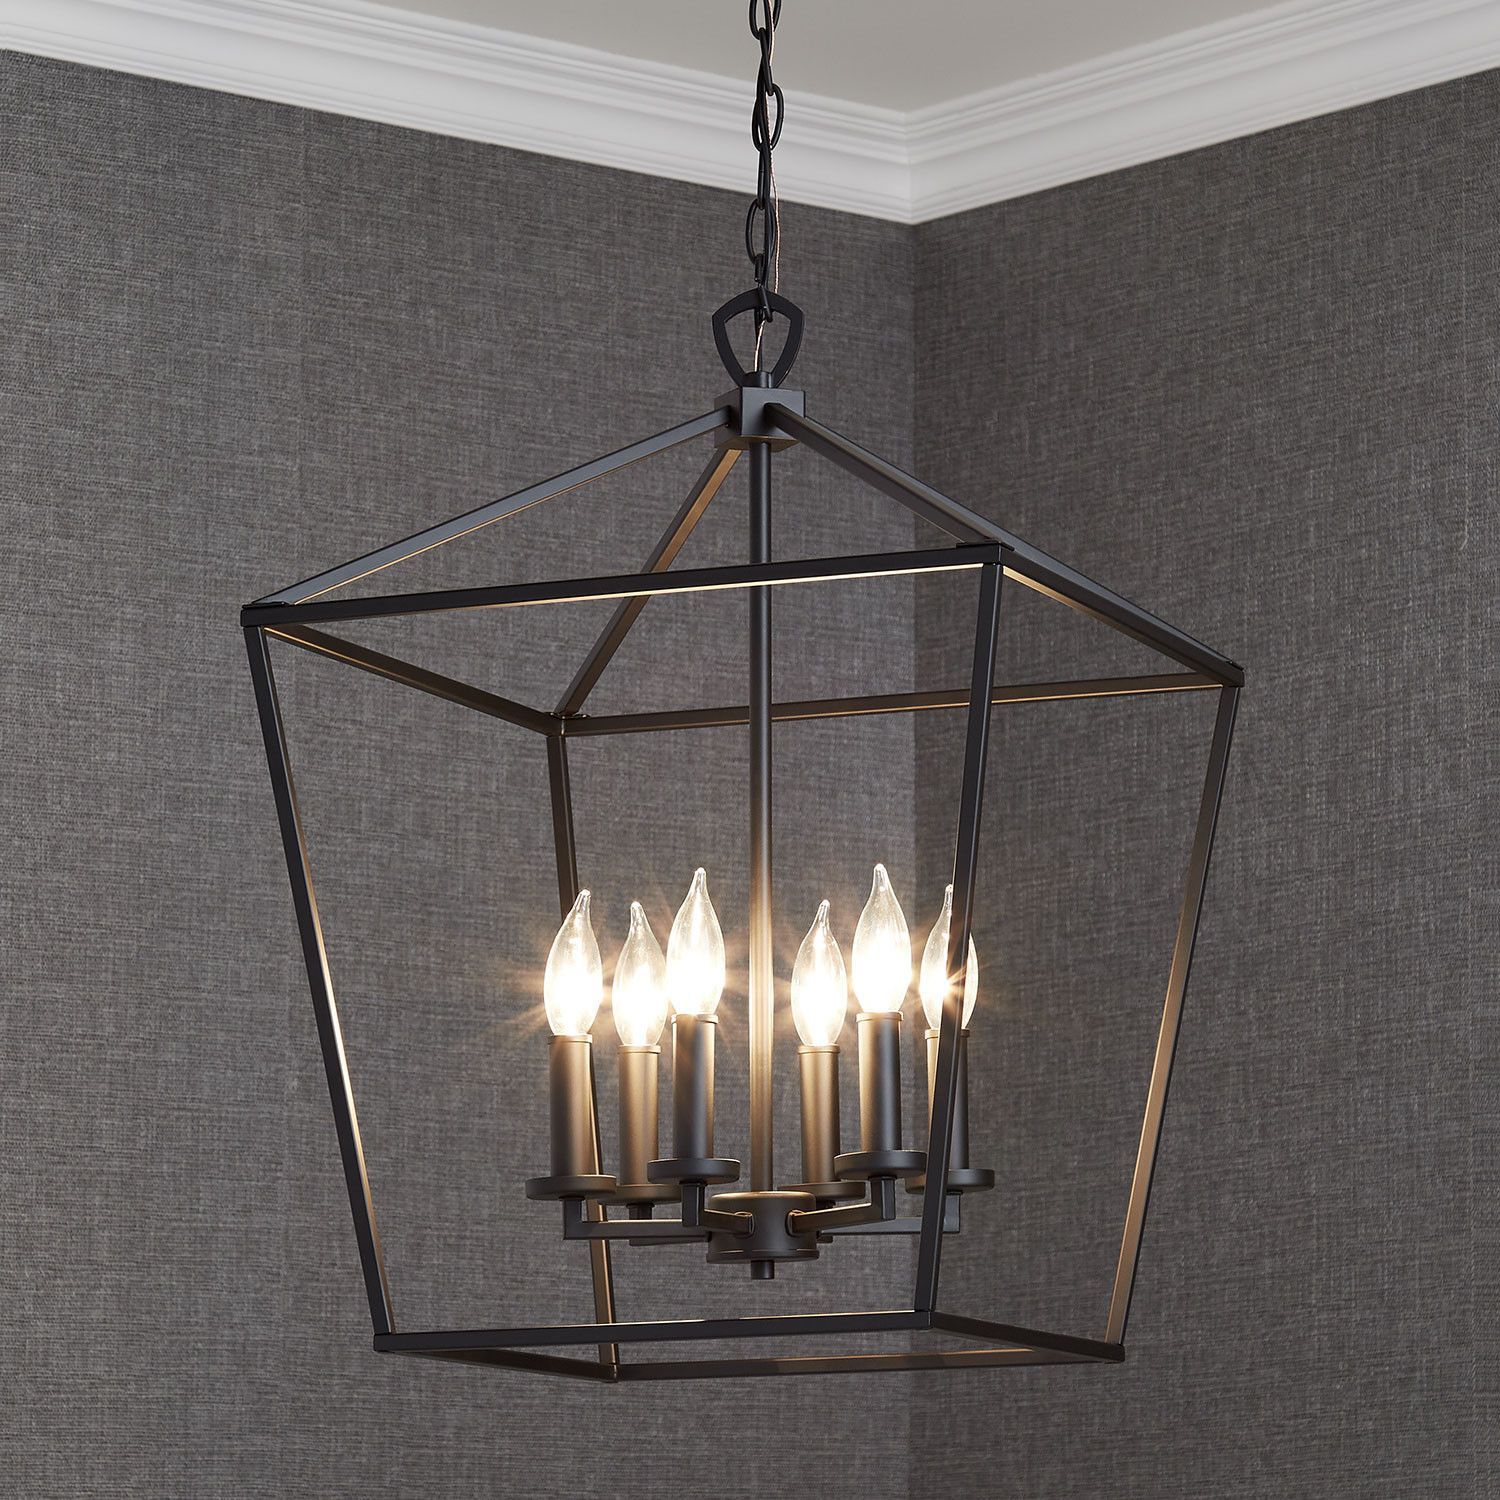 Hillpoint 6 Light Pendant Chandelier – Lighting With Six Light Lantern Chandeliers (View 11 of 15)